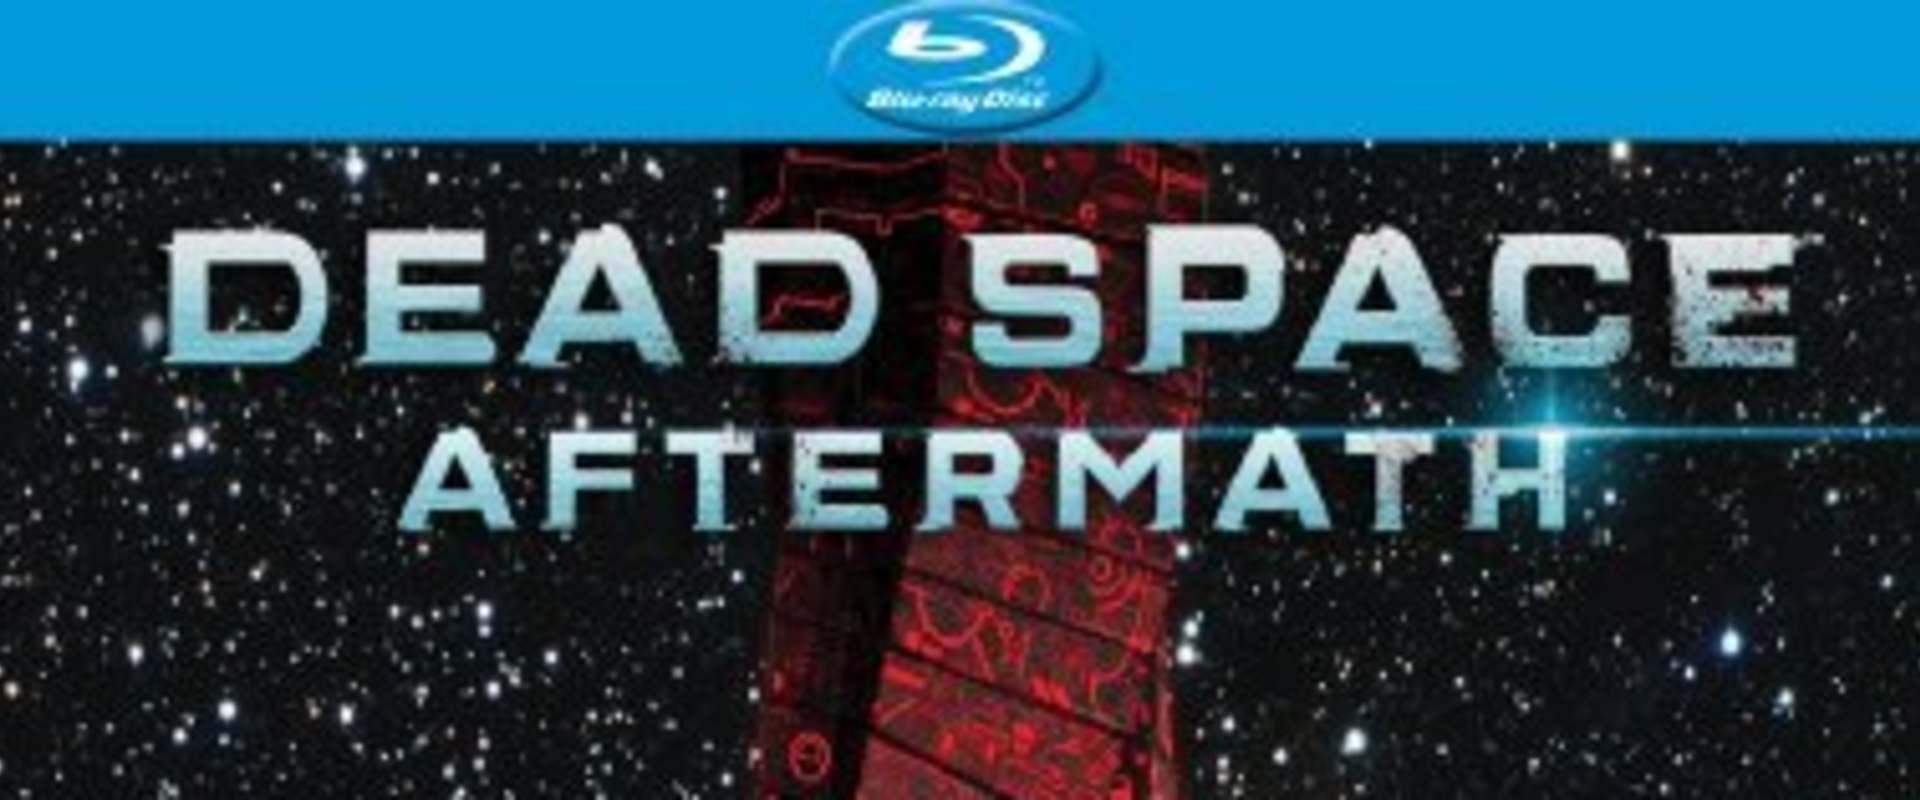 where to watch dead space: downfall